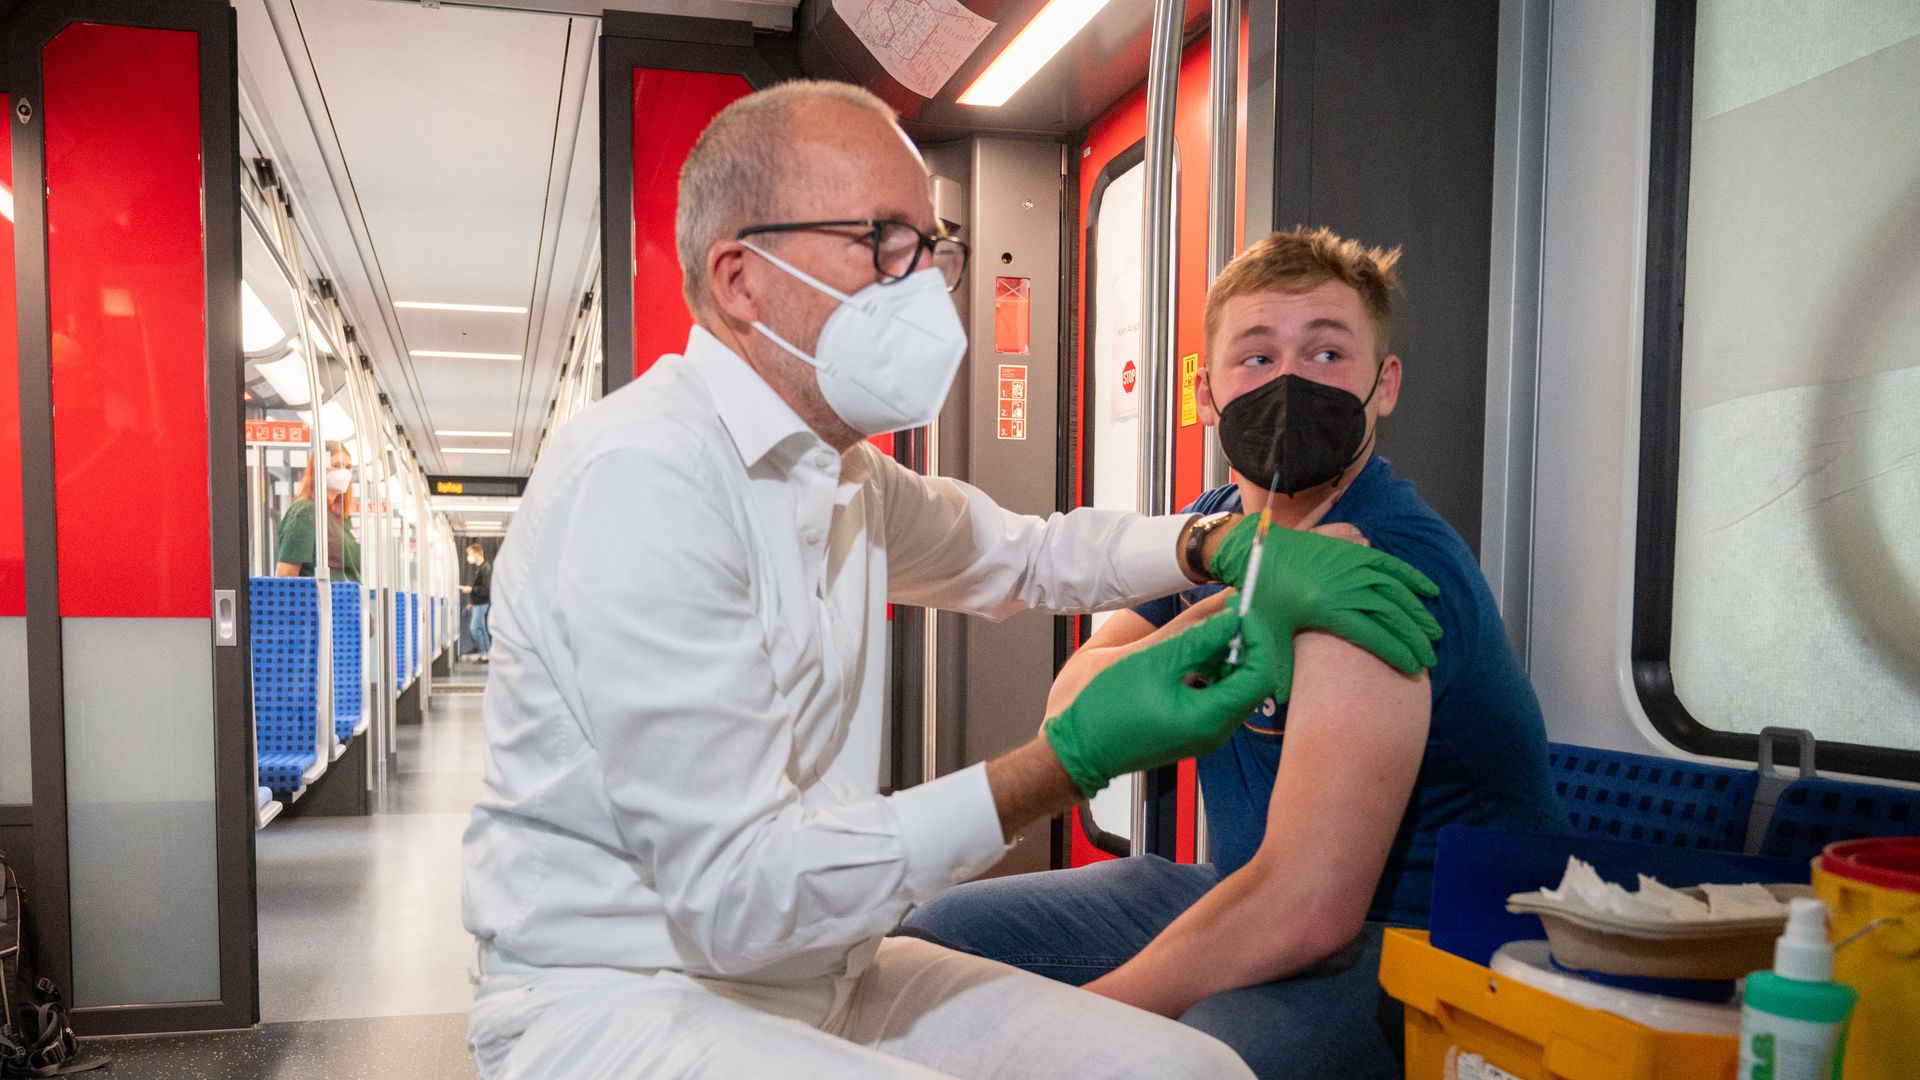 A health care worker preparing to administer a coronavirus vaccine in Berlin in August 2021.